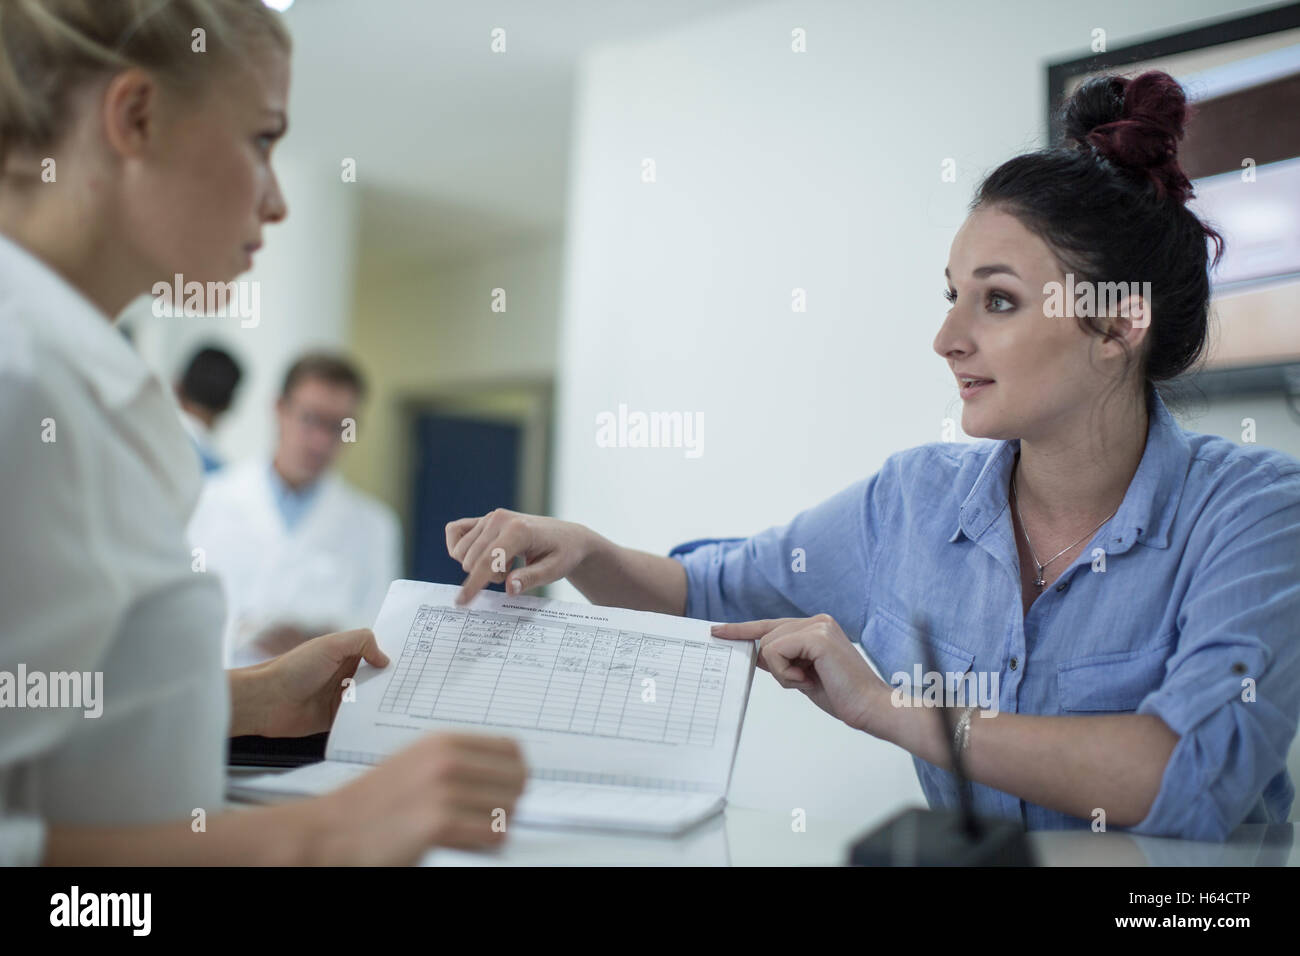 Two women with book at reception Stock Photo